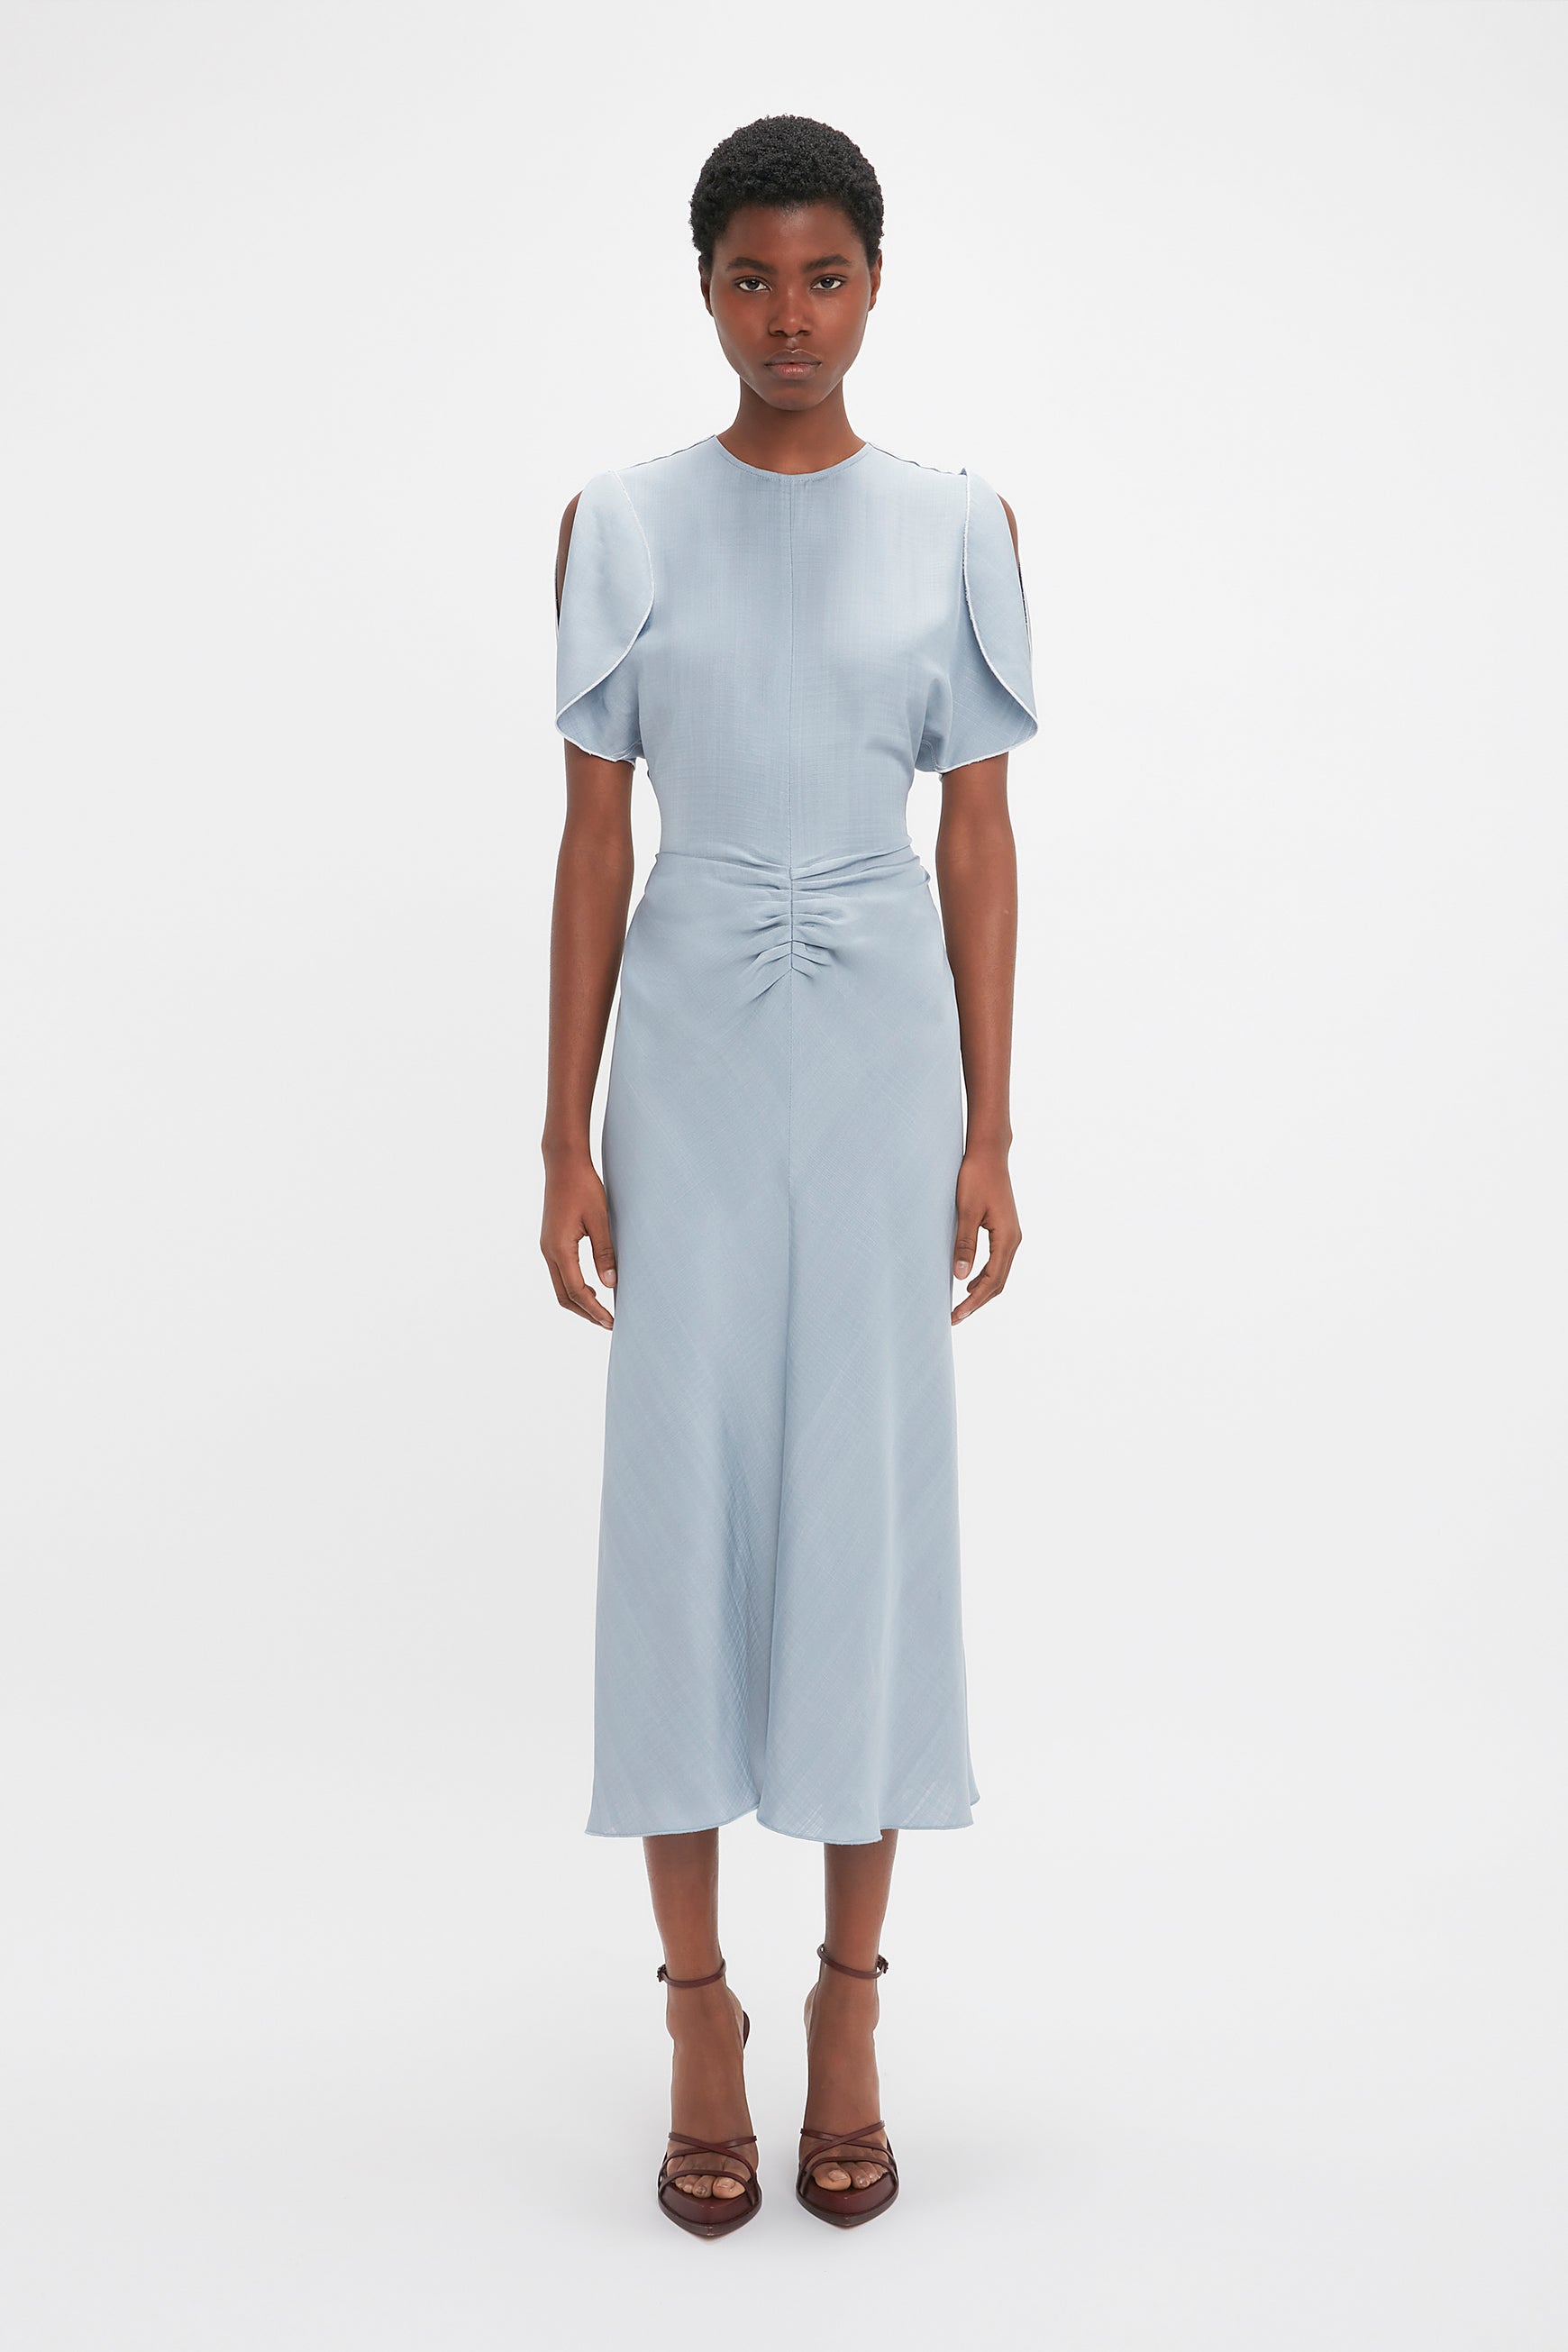 A black woman in a light blue Exclusive Gathered Waist Midi Dress In Pebble by Victoria Beckham, with cold-shoulder sleeves and standing against a white background.